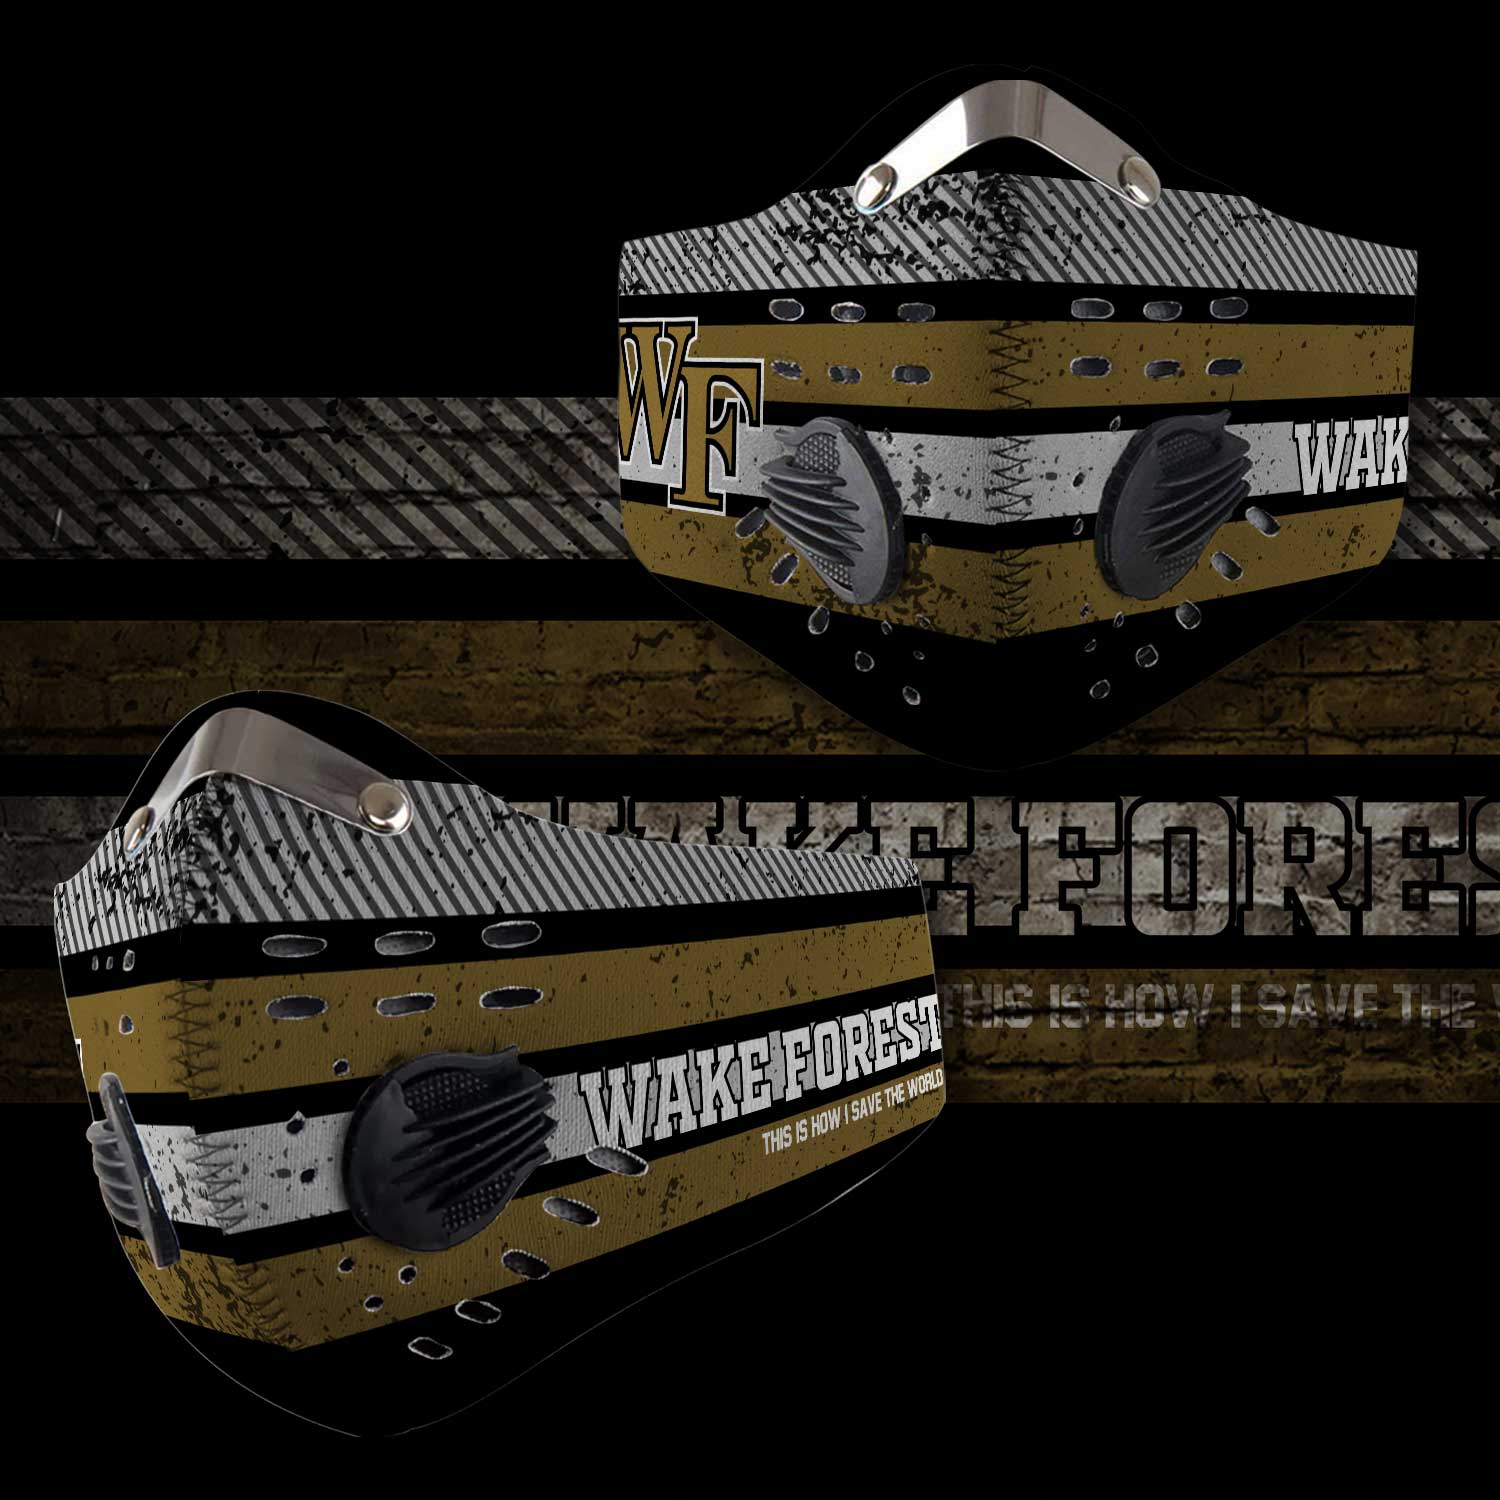 Wake forest demon deacons this is how i save the world face mask 2